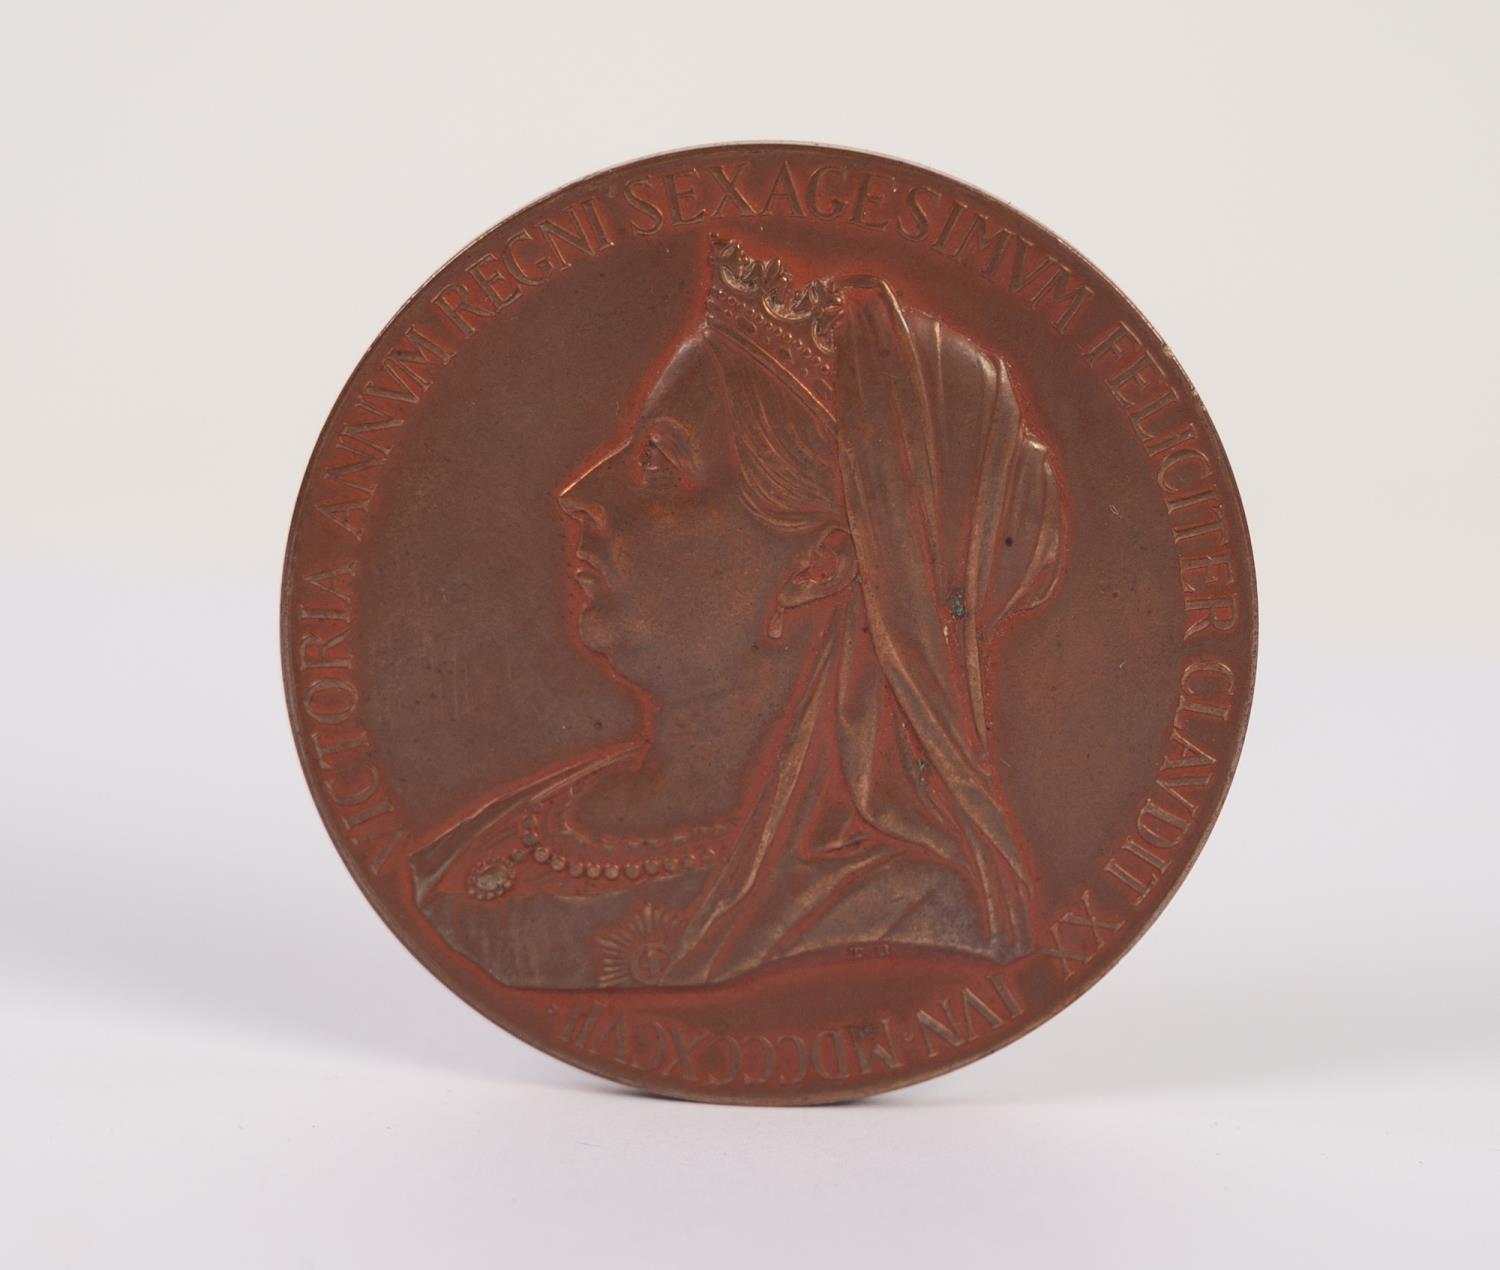 BRONZE MEDALLION 'DIAMOND JUBILEE' OF QUEEN VICTORIA 1897 obverse with bust reverse with young